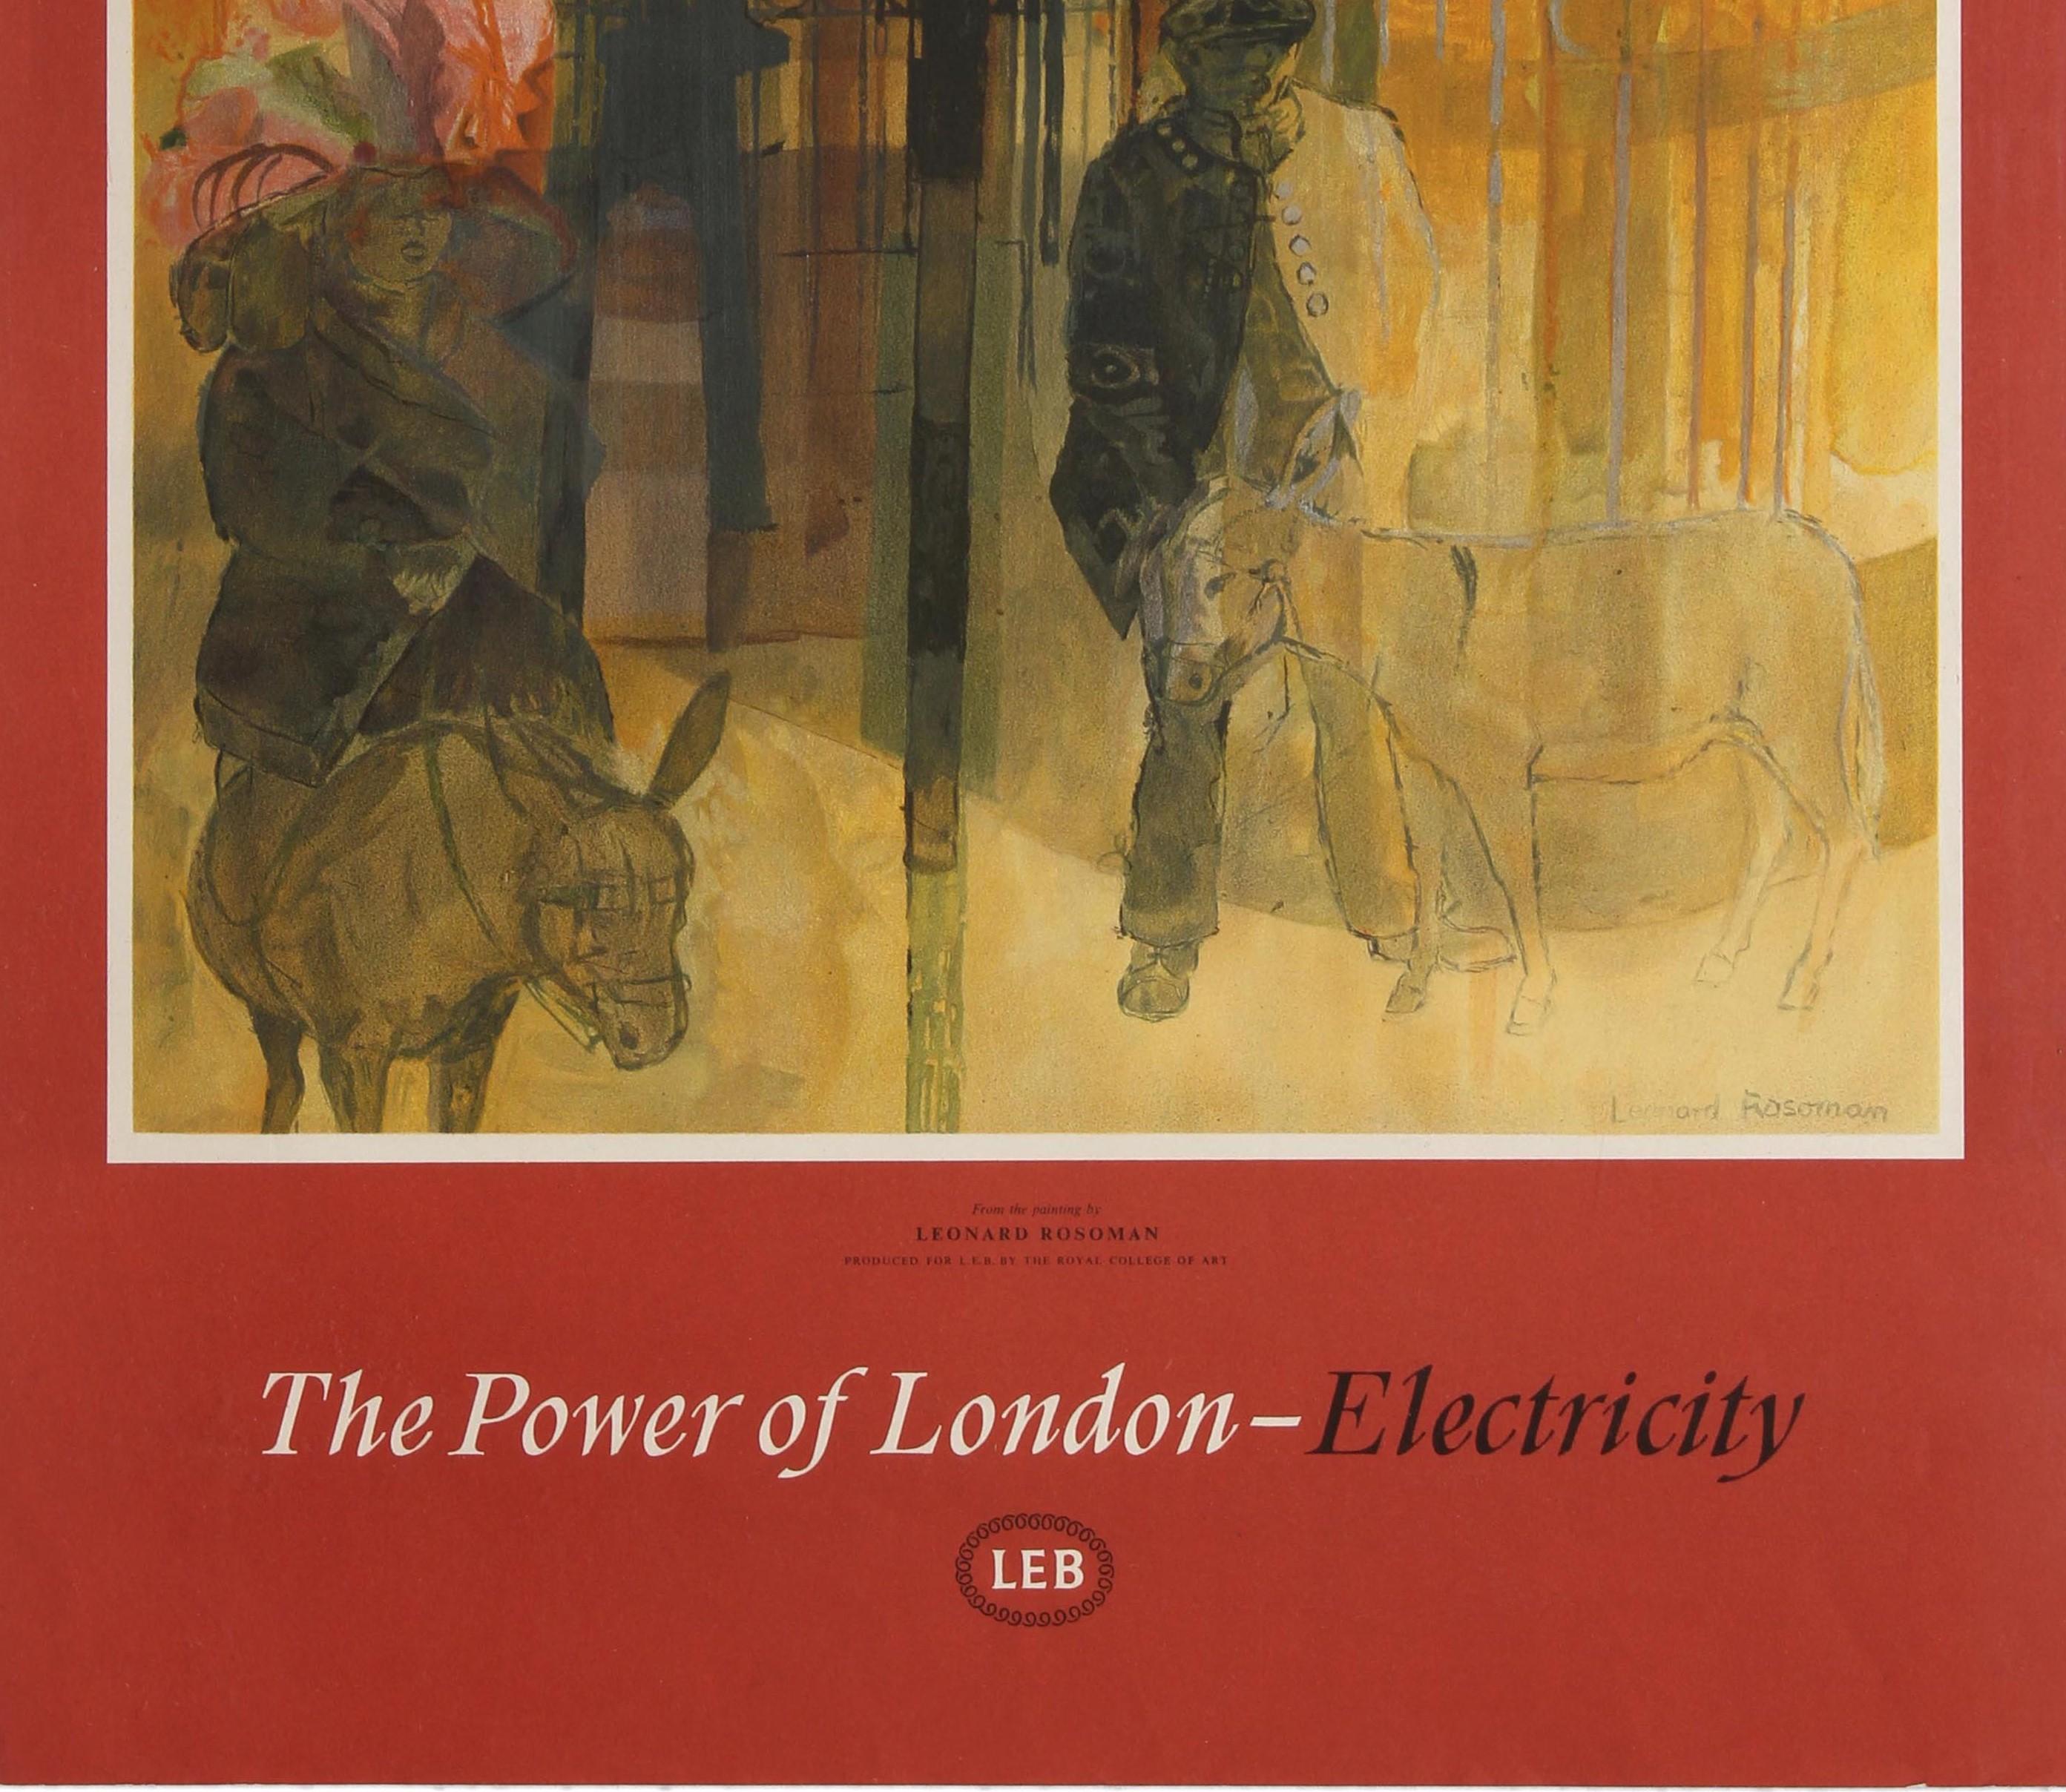 electricity in london history